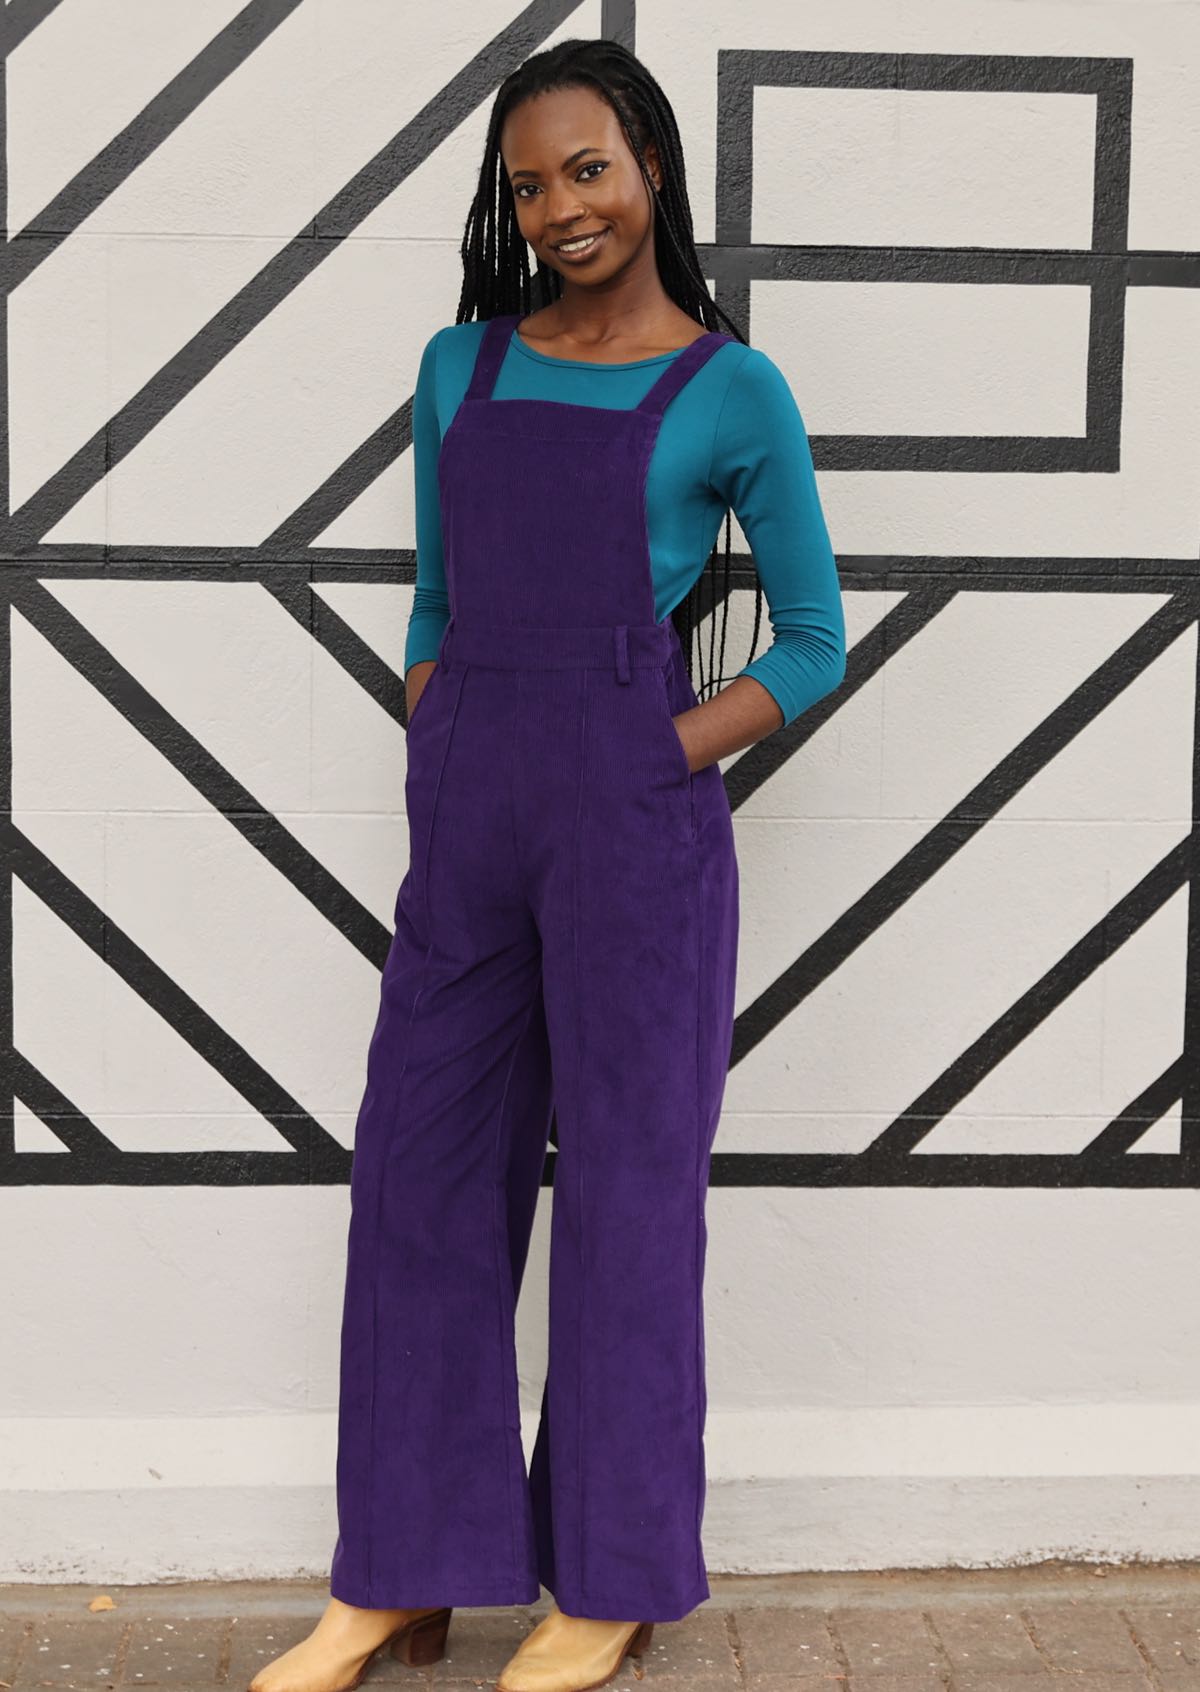 woman with teal top underneath purple cord overalls